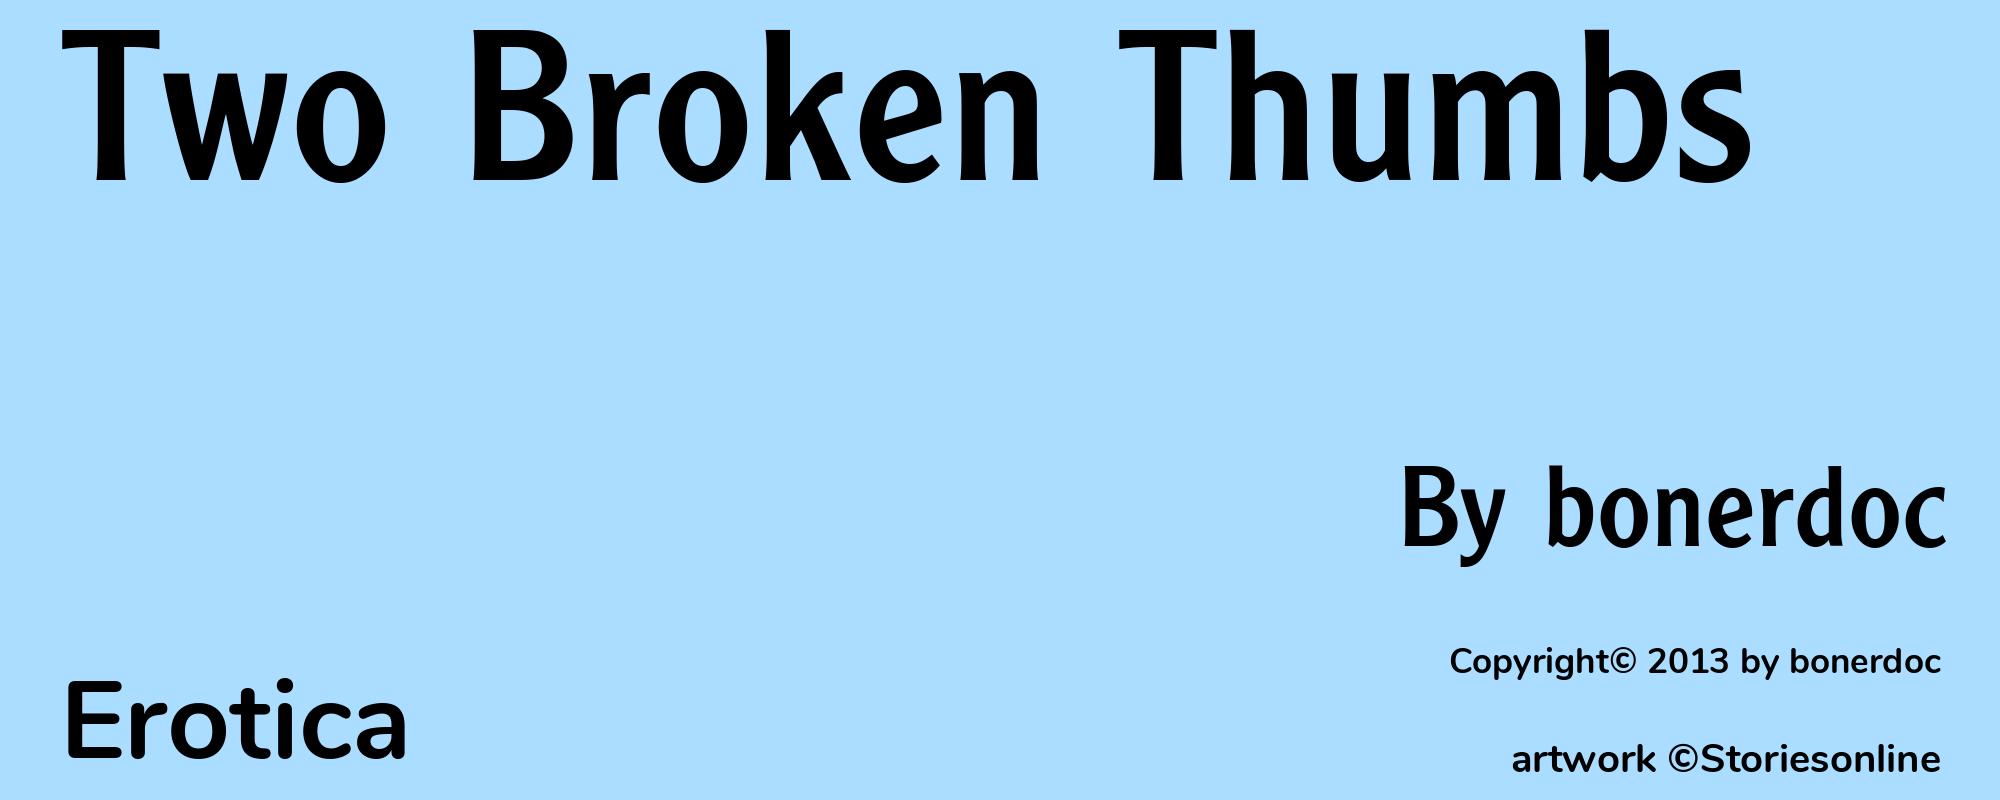 Two Broken Thumbs - Cover